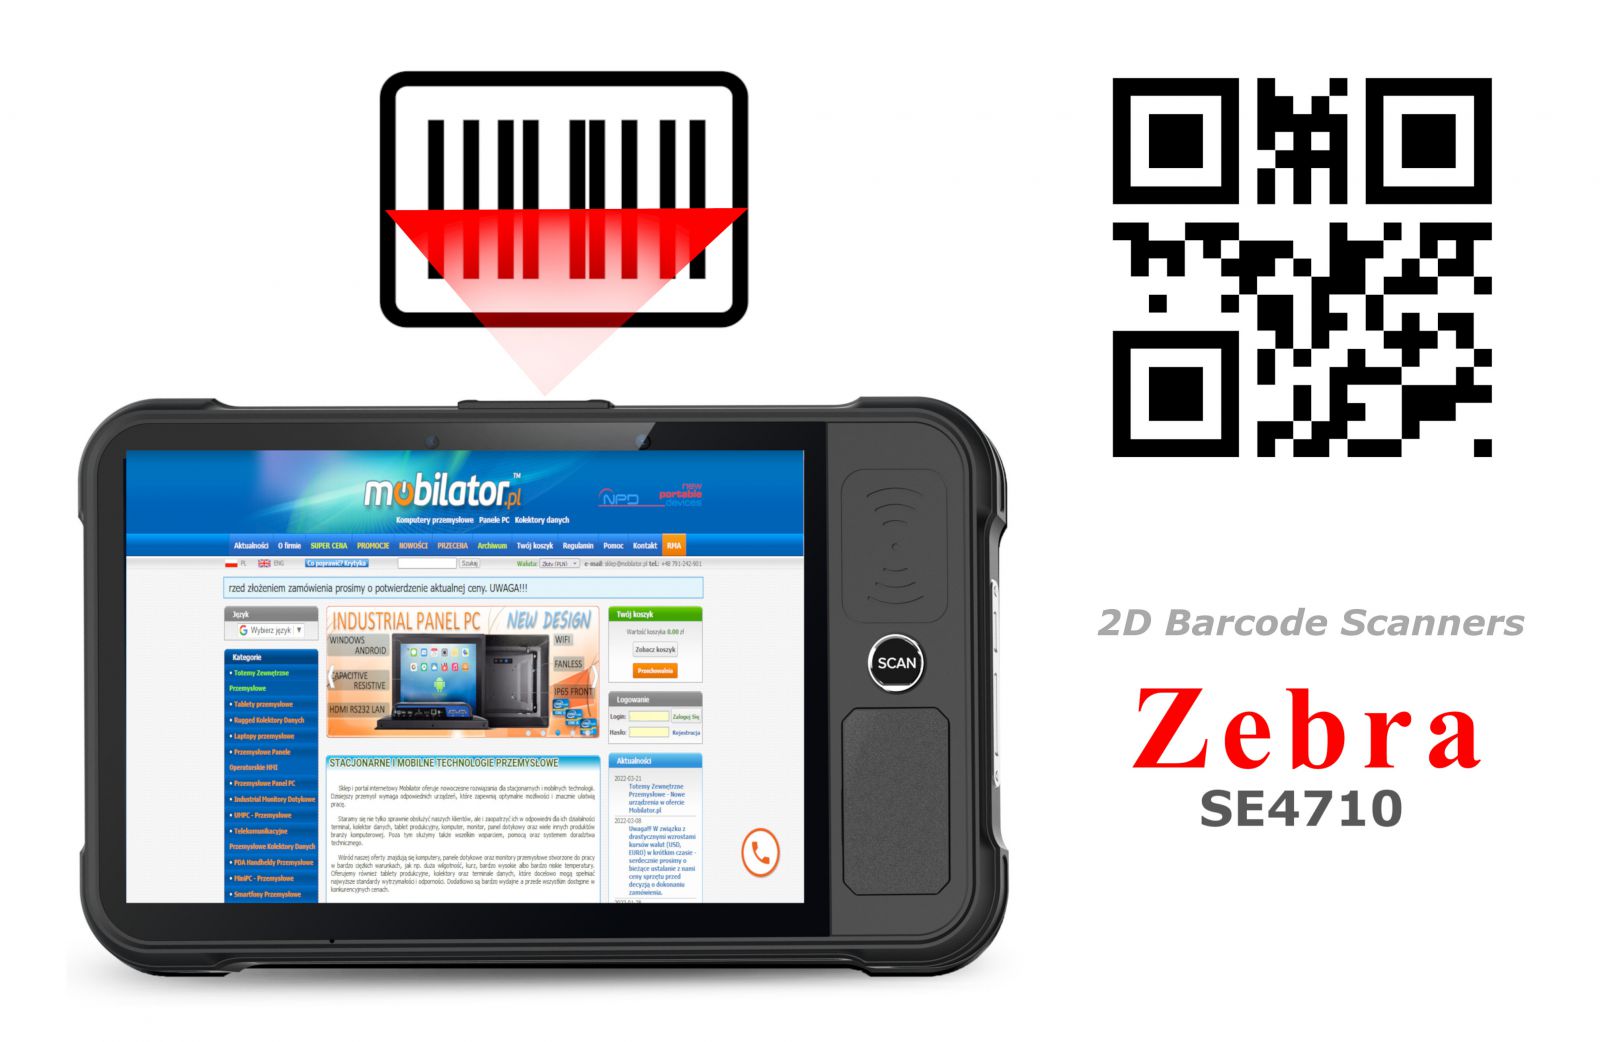 ZEBRA Code Reader and Scanner in Chainway Tablet P80-PE